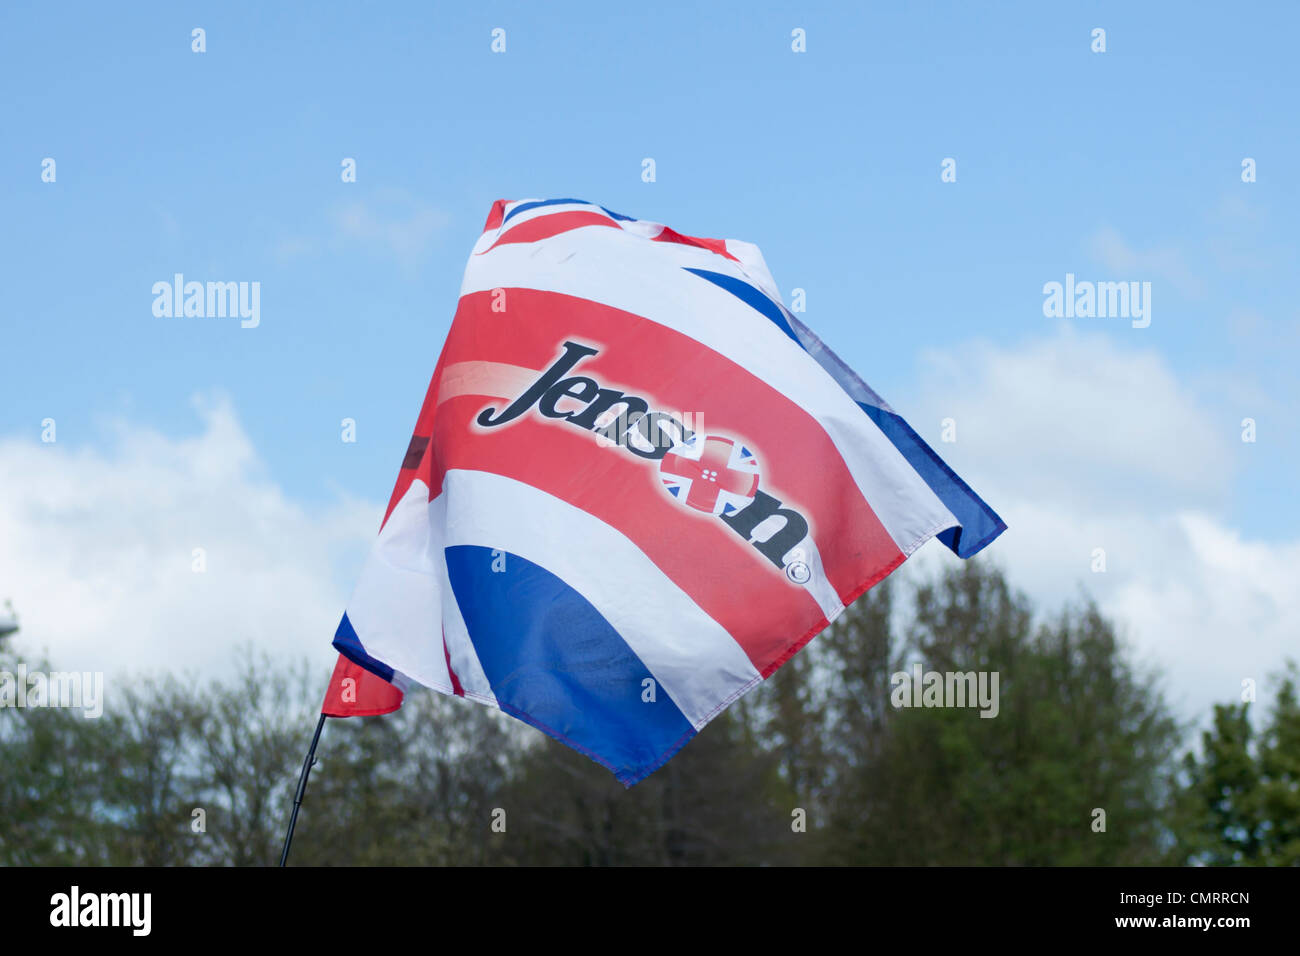 A Jenson Button flag flying high at an event held in his home town of Frome, Somerset. Stock Photo